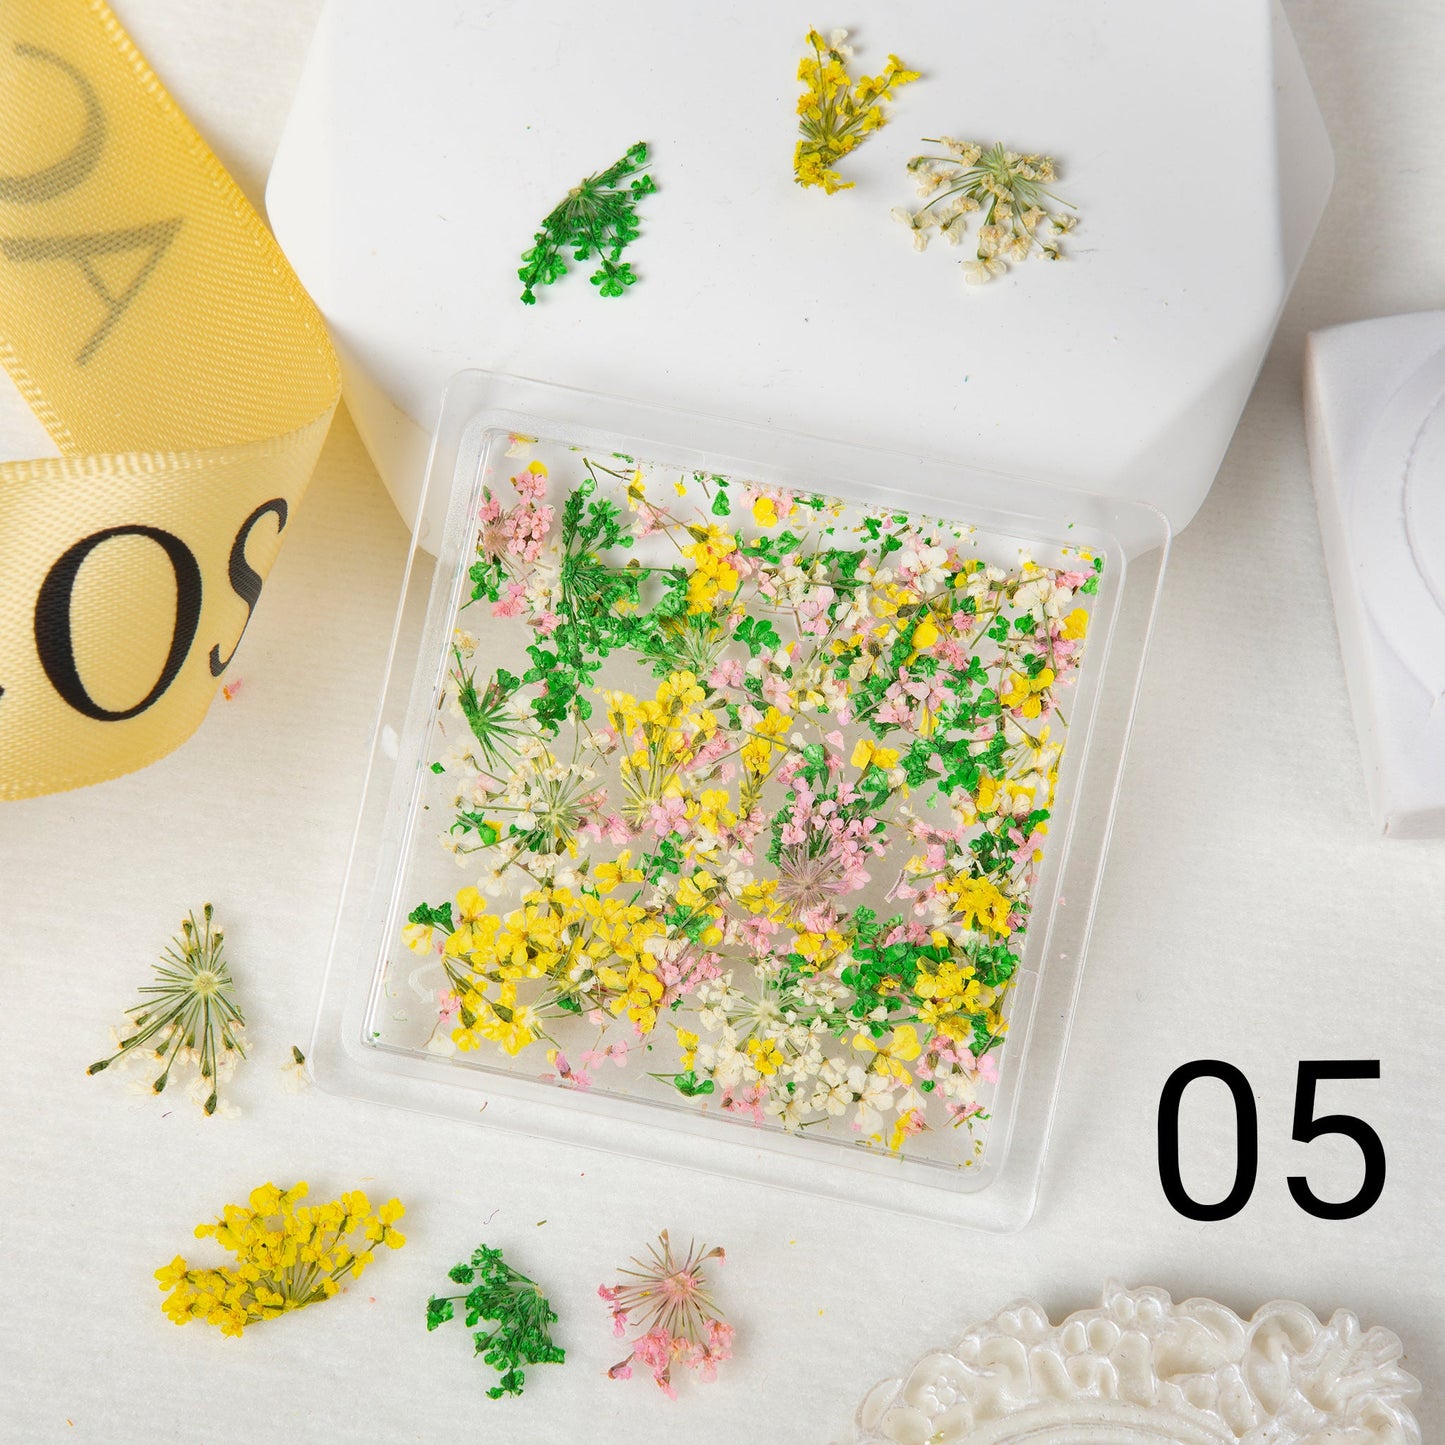 ACOS Dried Flowers Nail Art Decoration